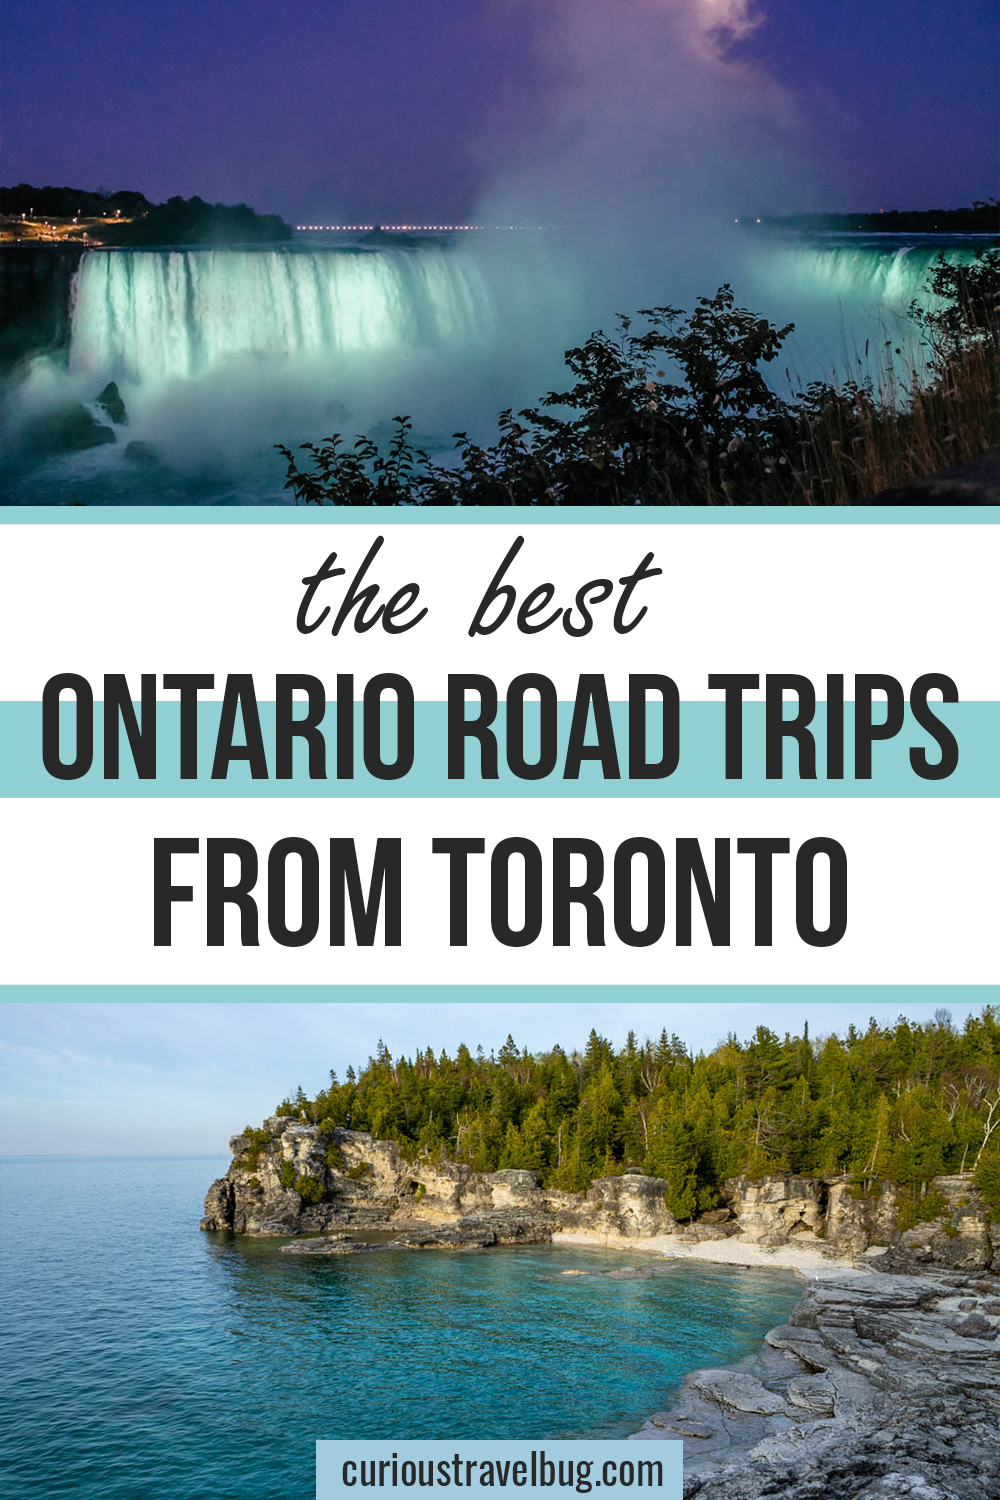 The best Ontario road trips. Includes lots of weekend road trips in Ontario as well as longer trips to take you to the far reaches of the province. All the best natural scenery and parks as well as beaches, wine tasting, and exploring our historic cities and towns.